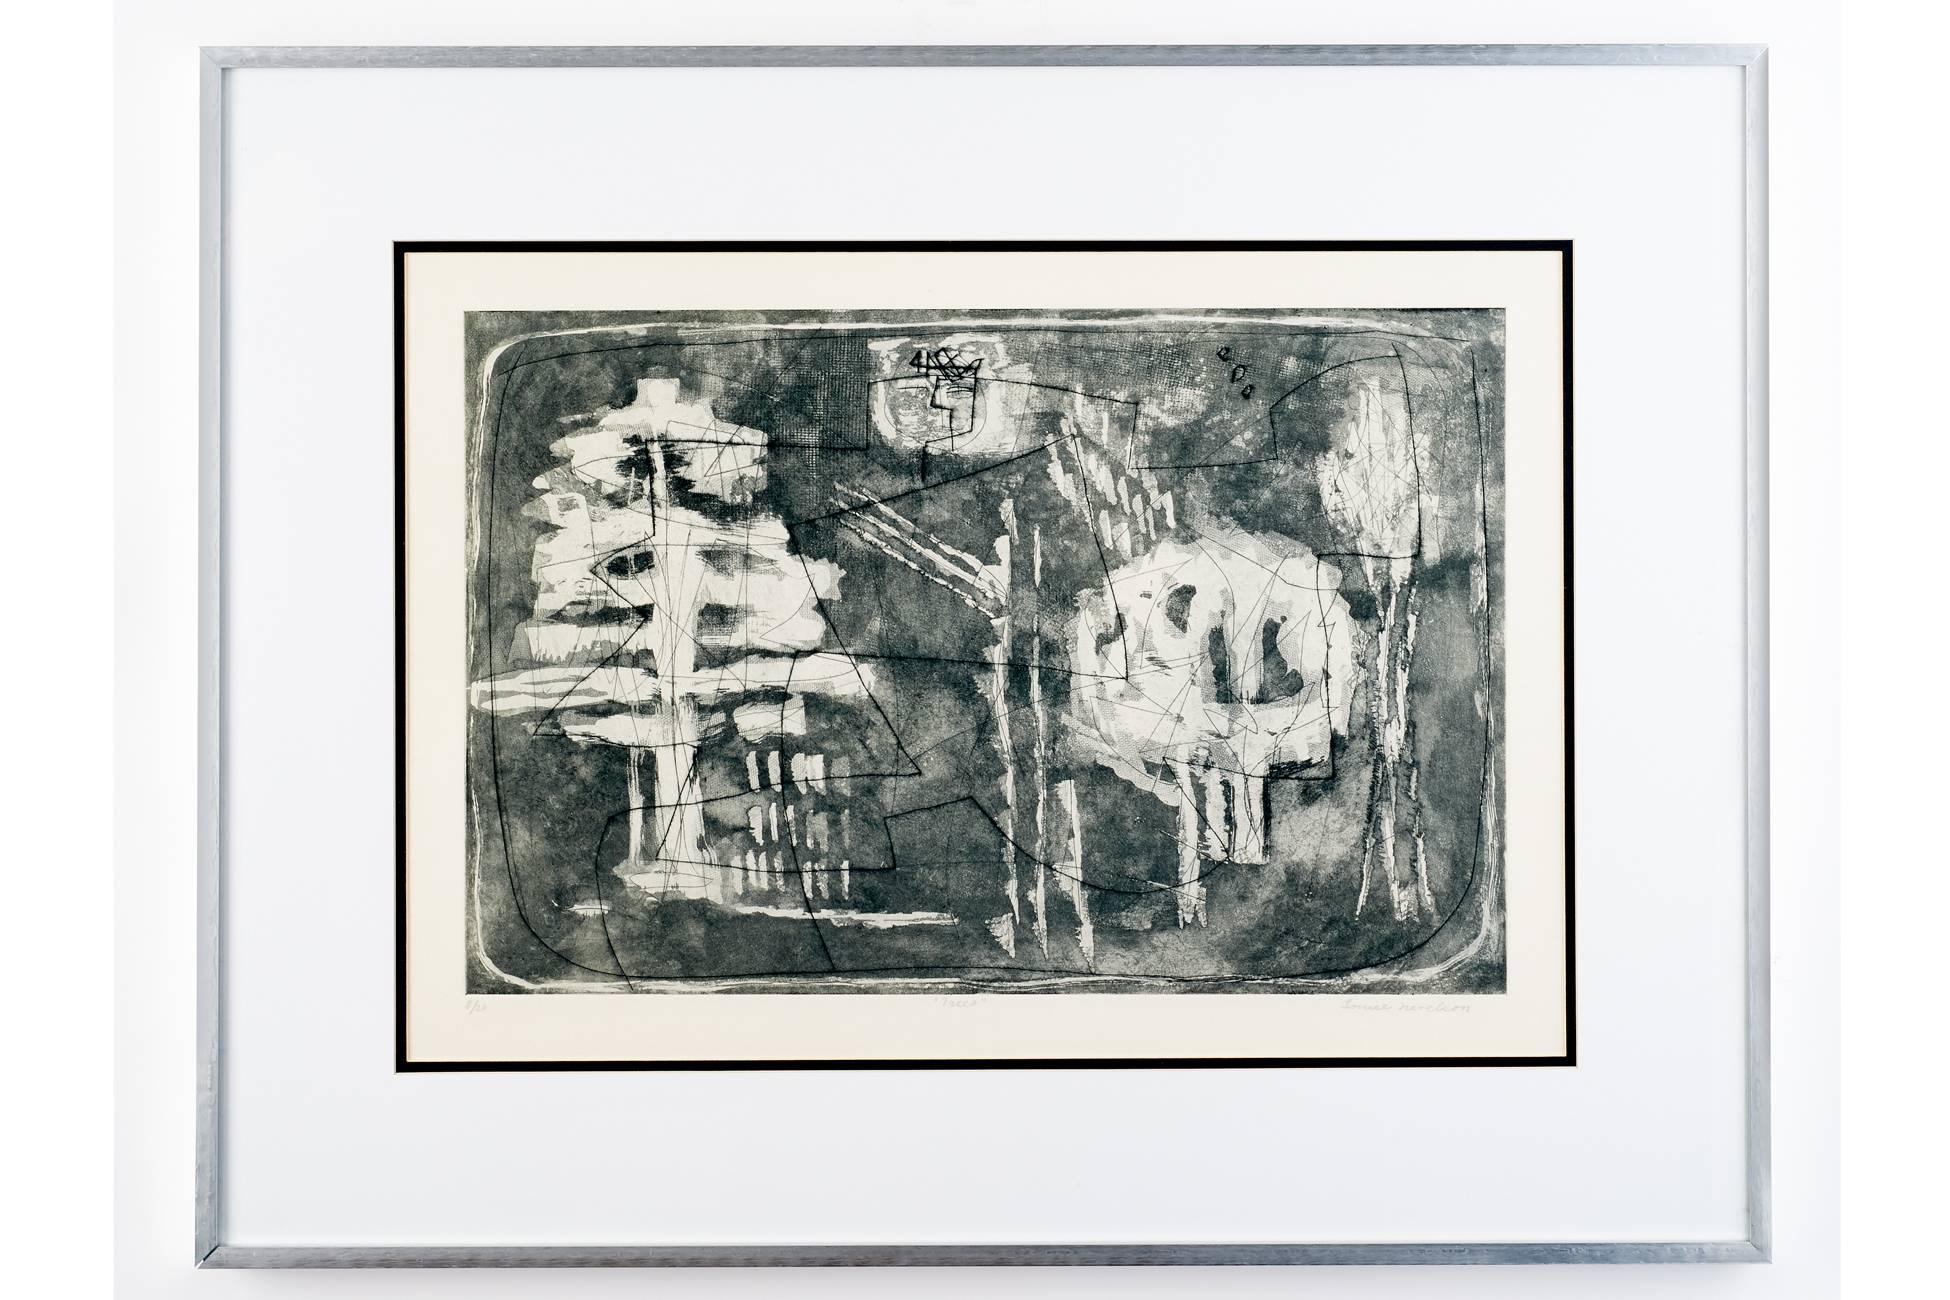 Louise Nevelson (1899 – 1988)

A beautiful and poetic black, white, and grey etching with aquatint by Louise Nevelson. Beloved for her monochromatic wood wall assemblages, Nevelson actively pursued printmaking in the 1950's and 60's during a period